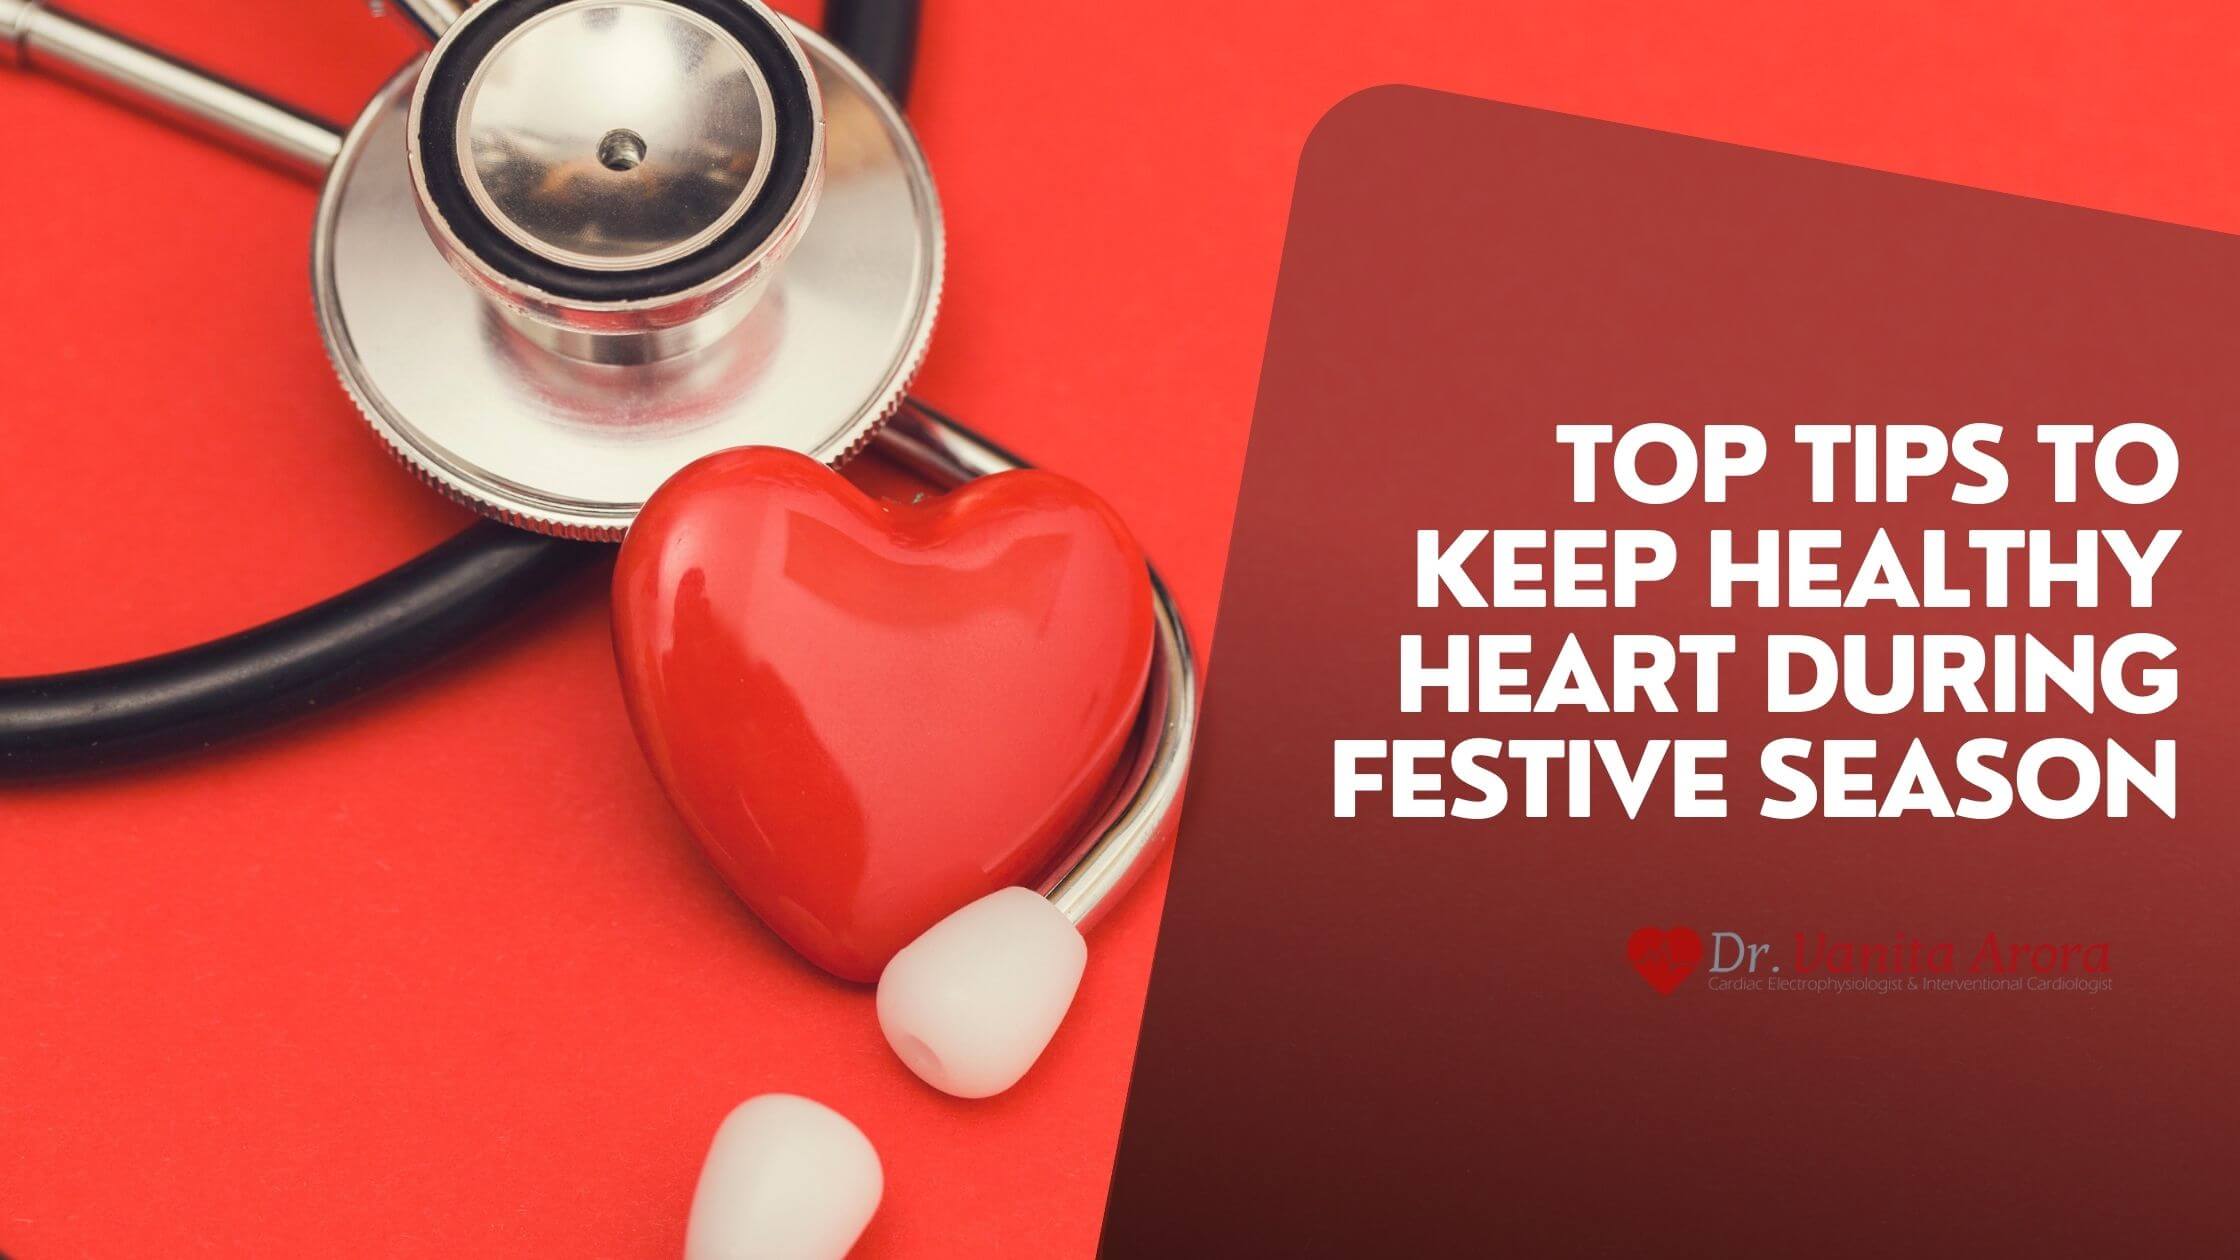 Top tips to keep healthy heart during festive season